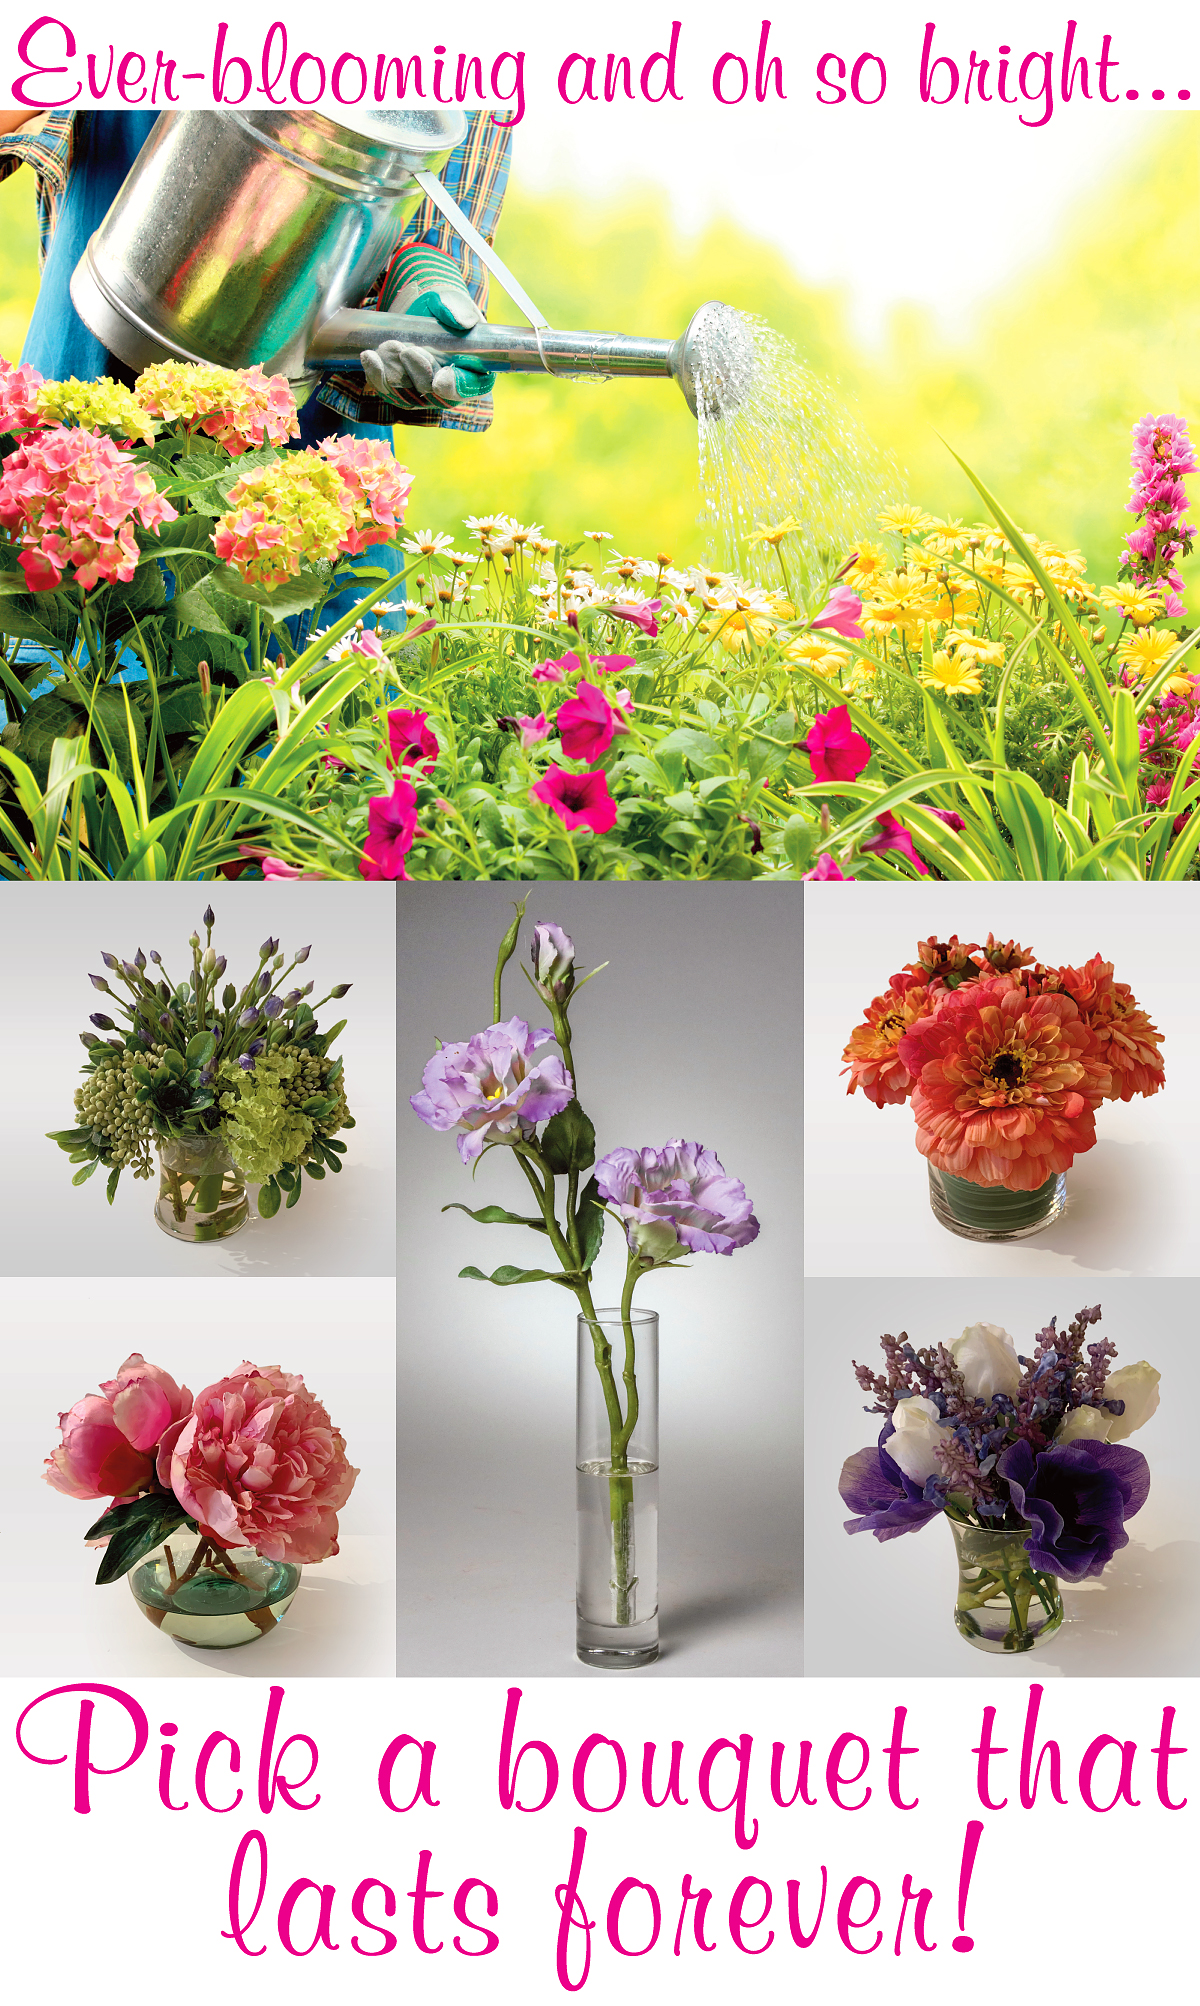 Pick a bouquet that lasts forever!